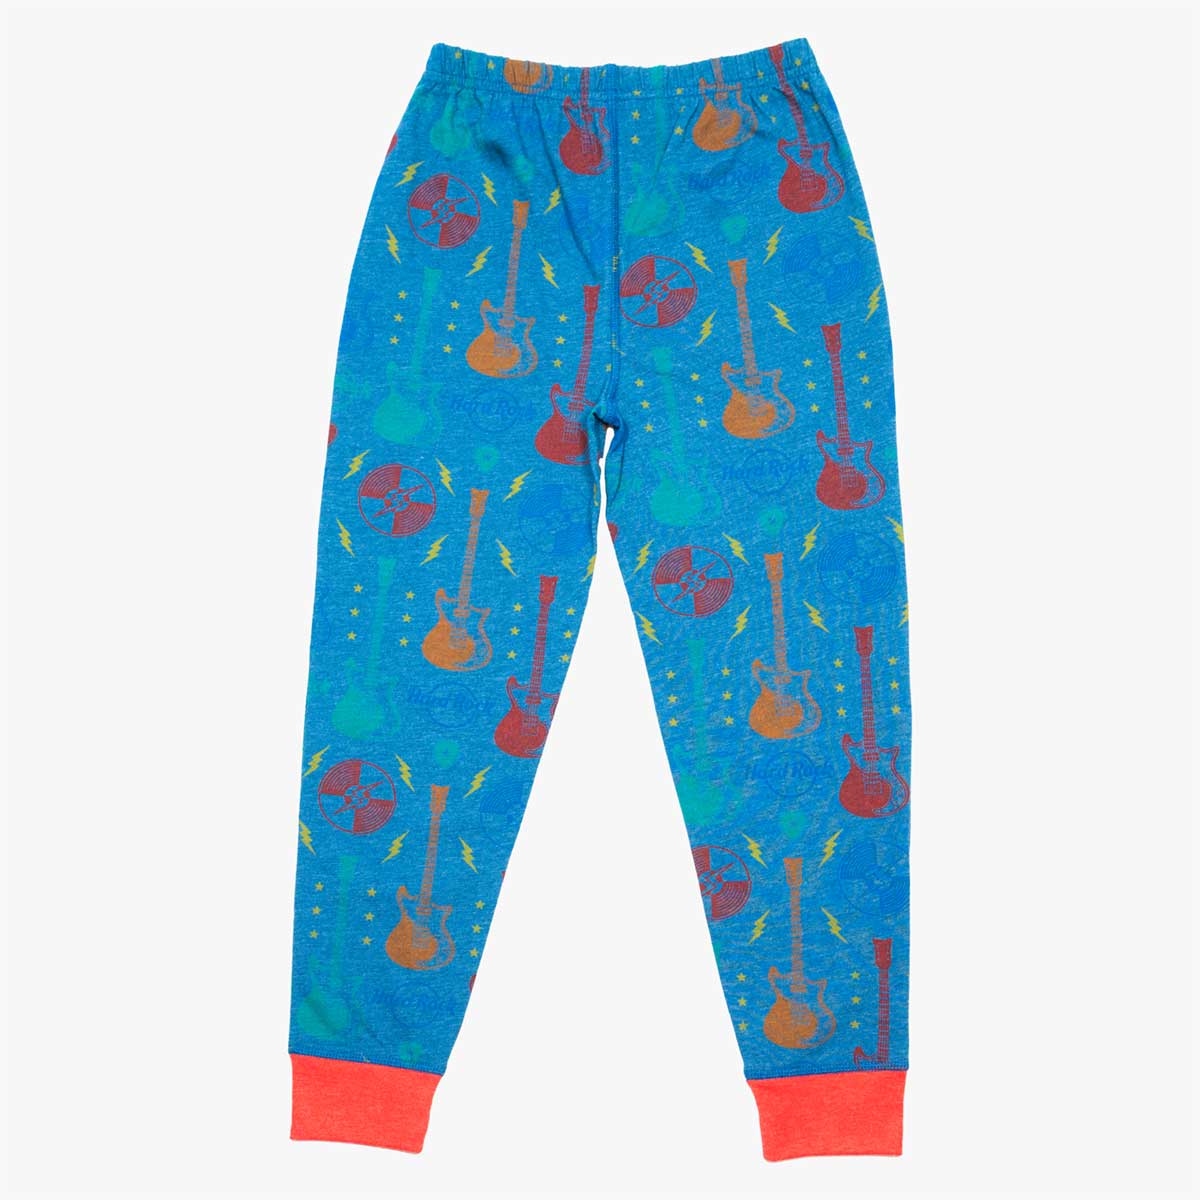 Cozy Holiday Youth Pajama Set in Blue Guitars Print image number 5